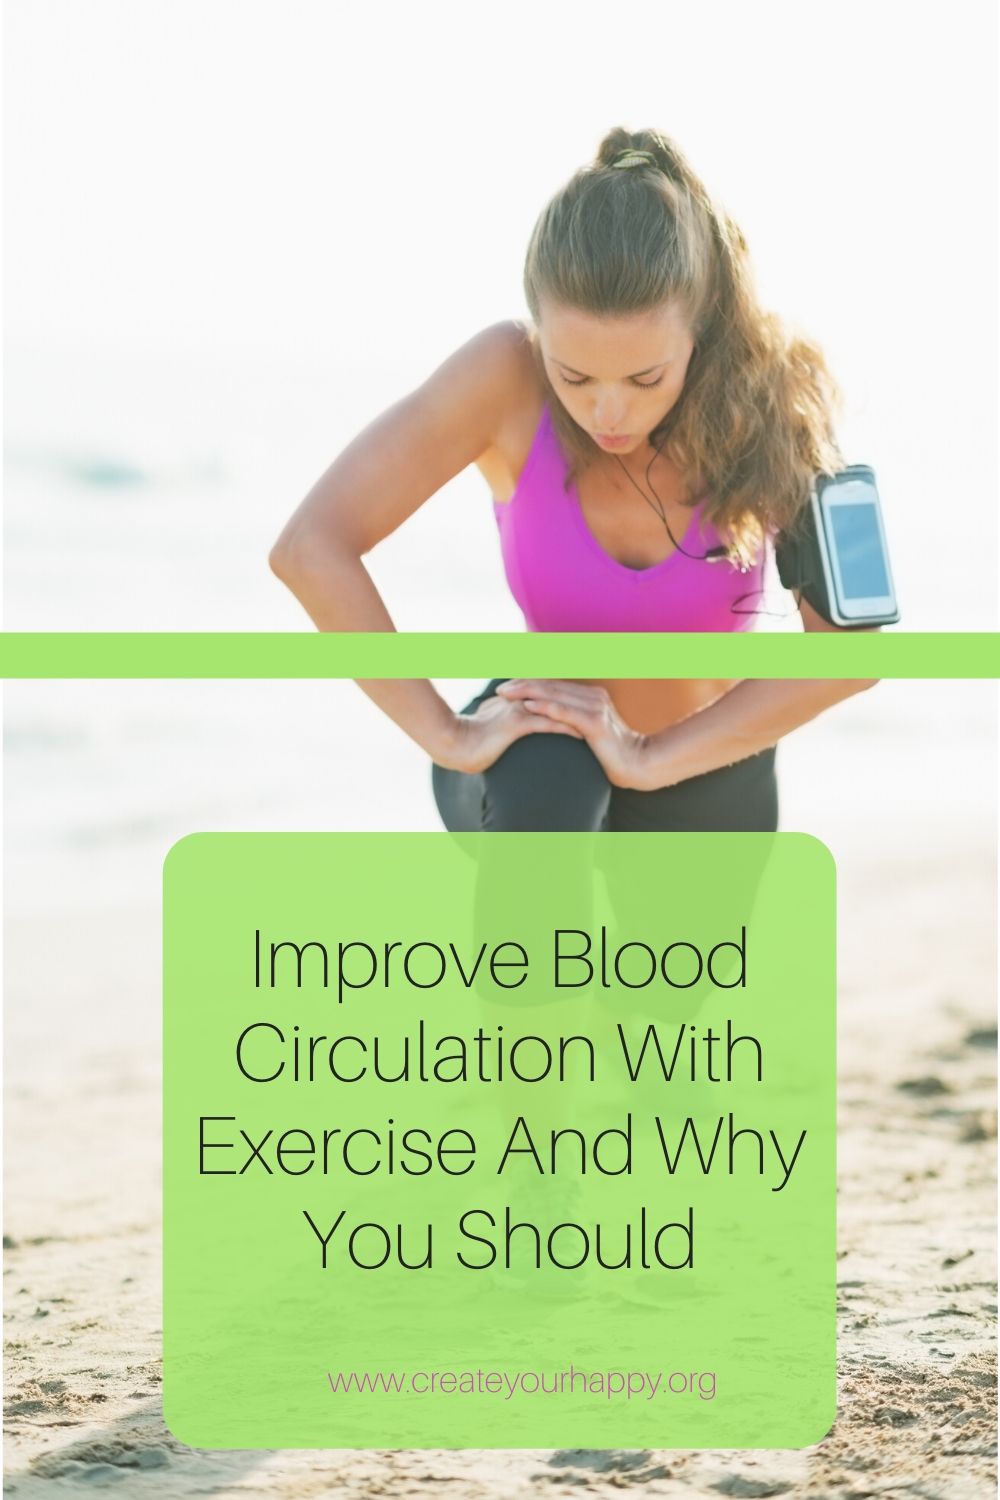 Improve Blood Circulation With Exercise And Why You Should